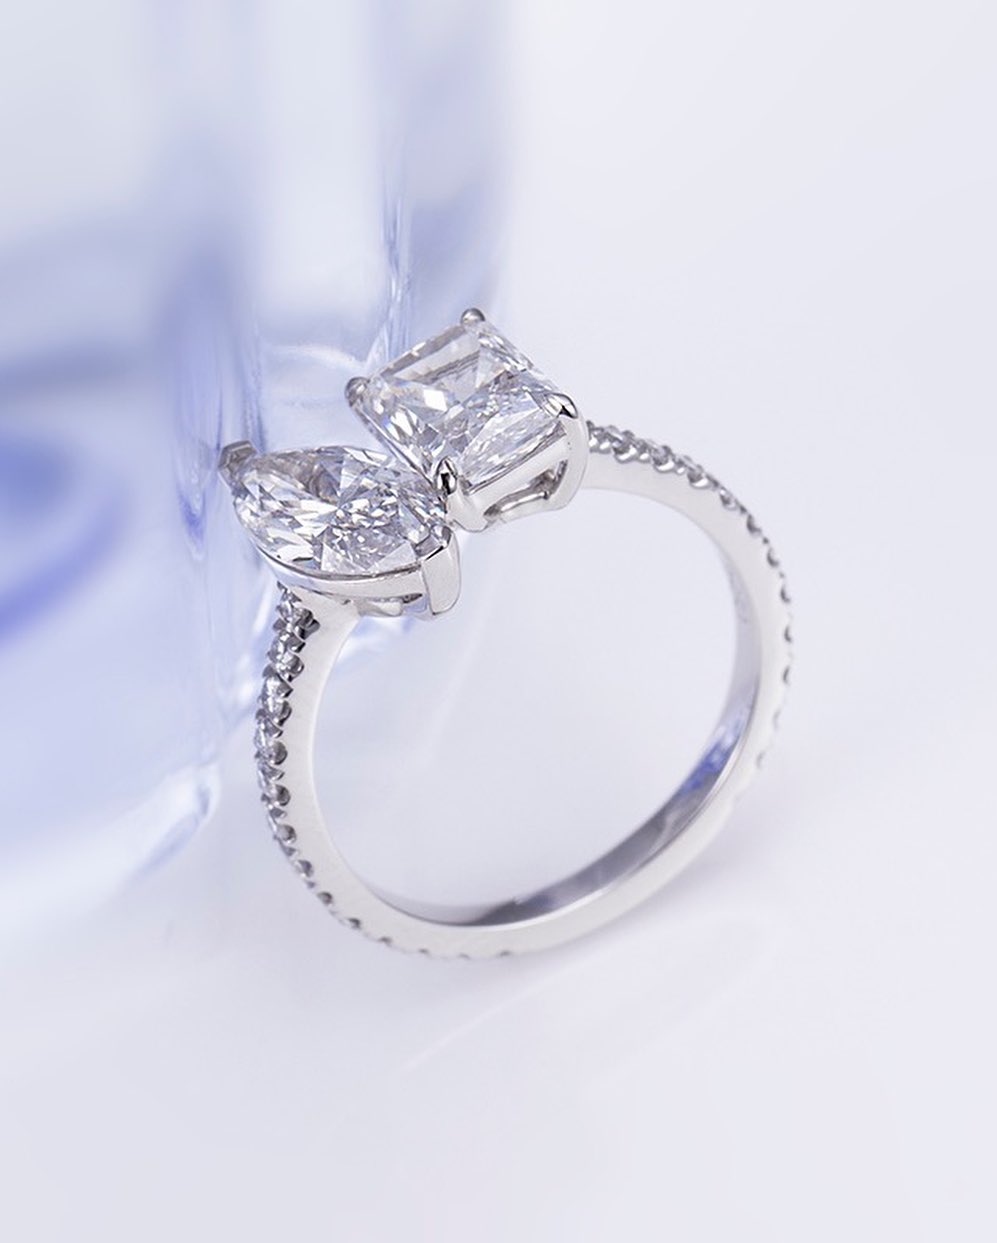 2.5Ct White Radiant And Marquise Cut Two Stone Ring | Engagement Ring For Fiancee | Proposal Ring  | Toi Et Moi Ring